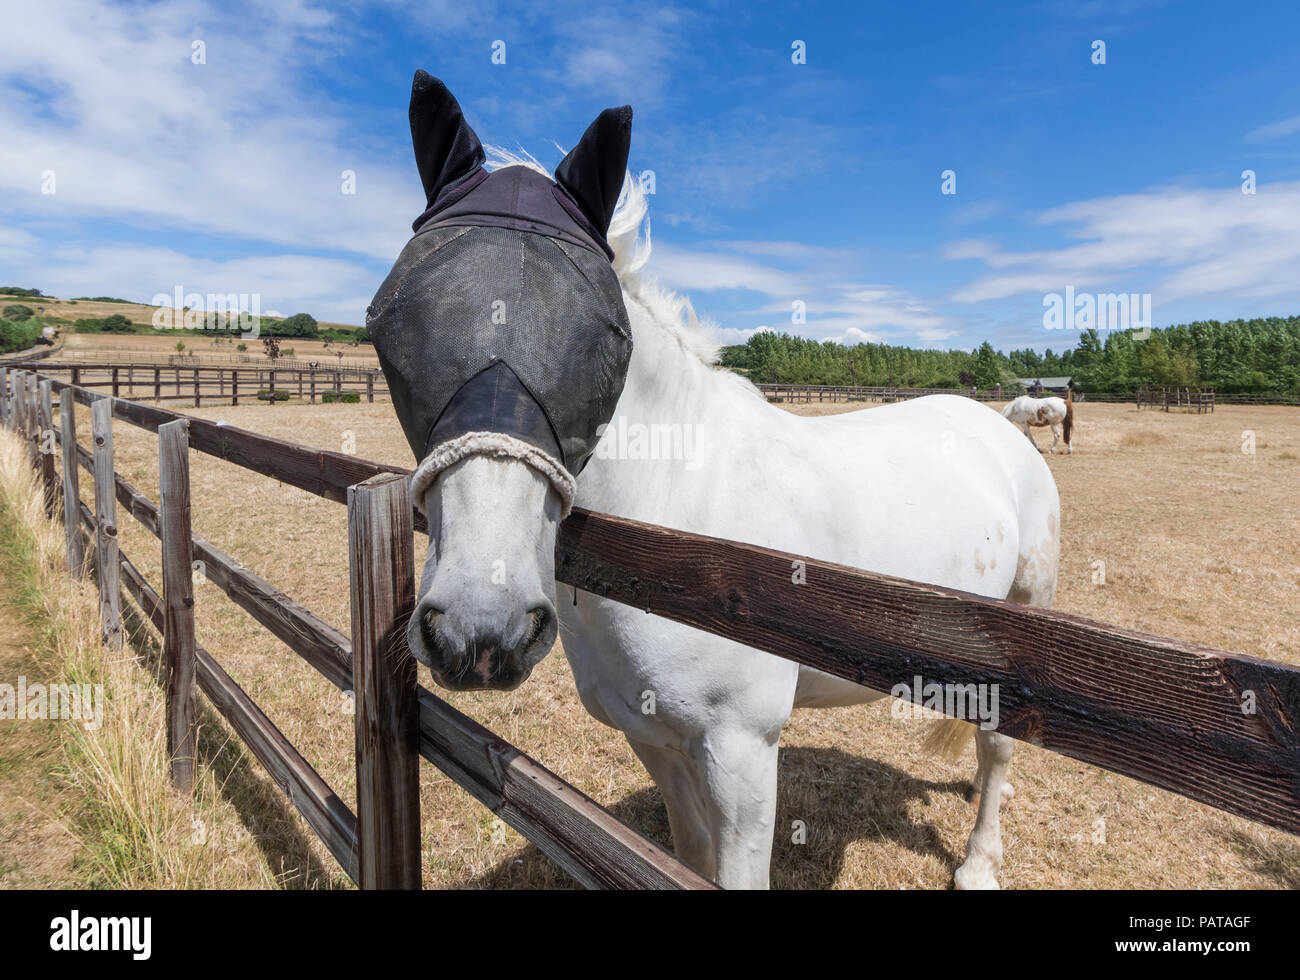 White horse in Summer looking over a fence, wearing a mesh fly veil protection mask on its head & ears to protect from flies, in West Sussex, UK Stock Photo